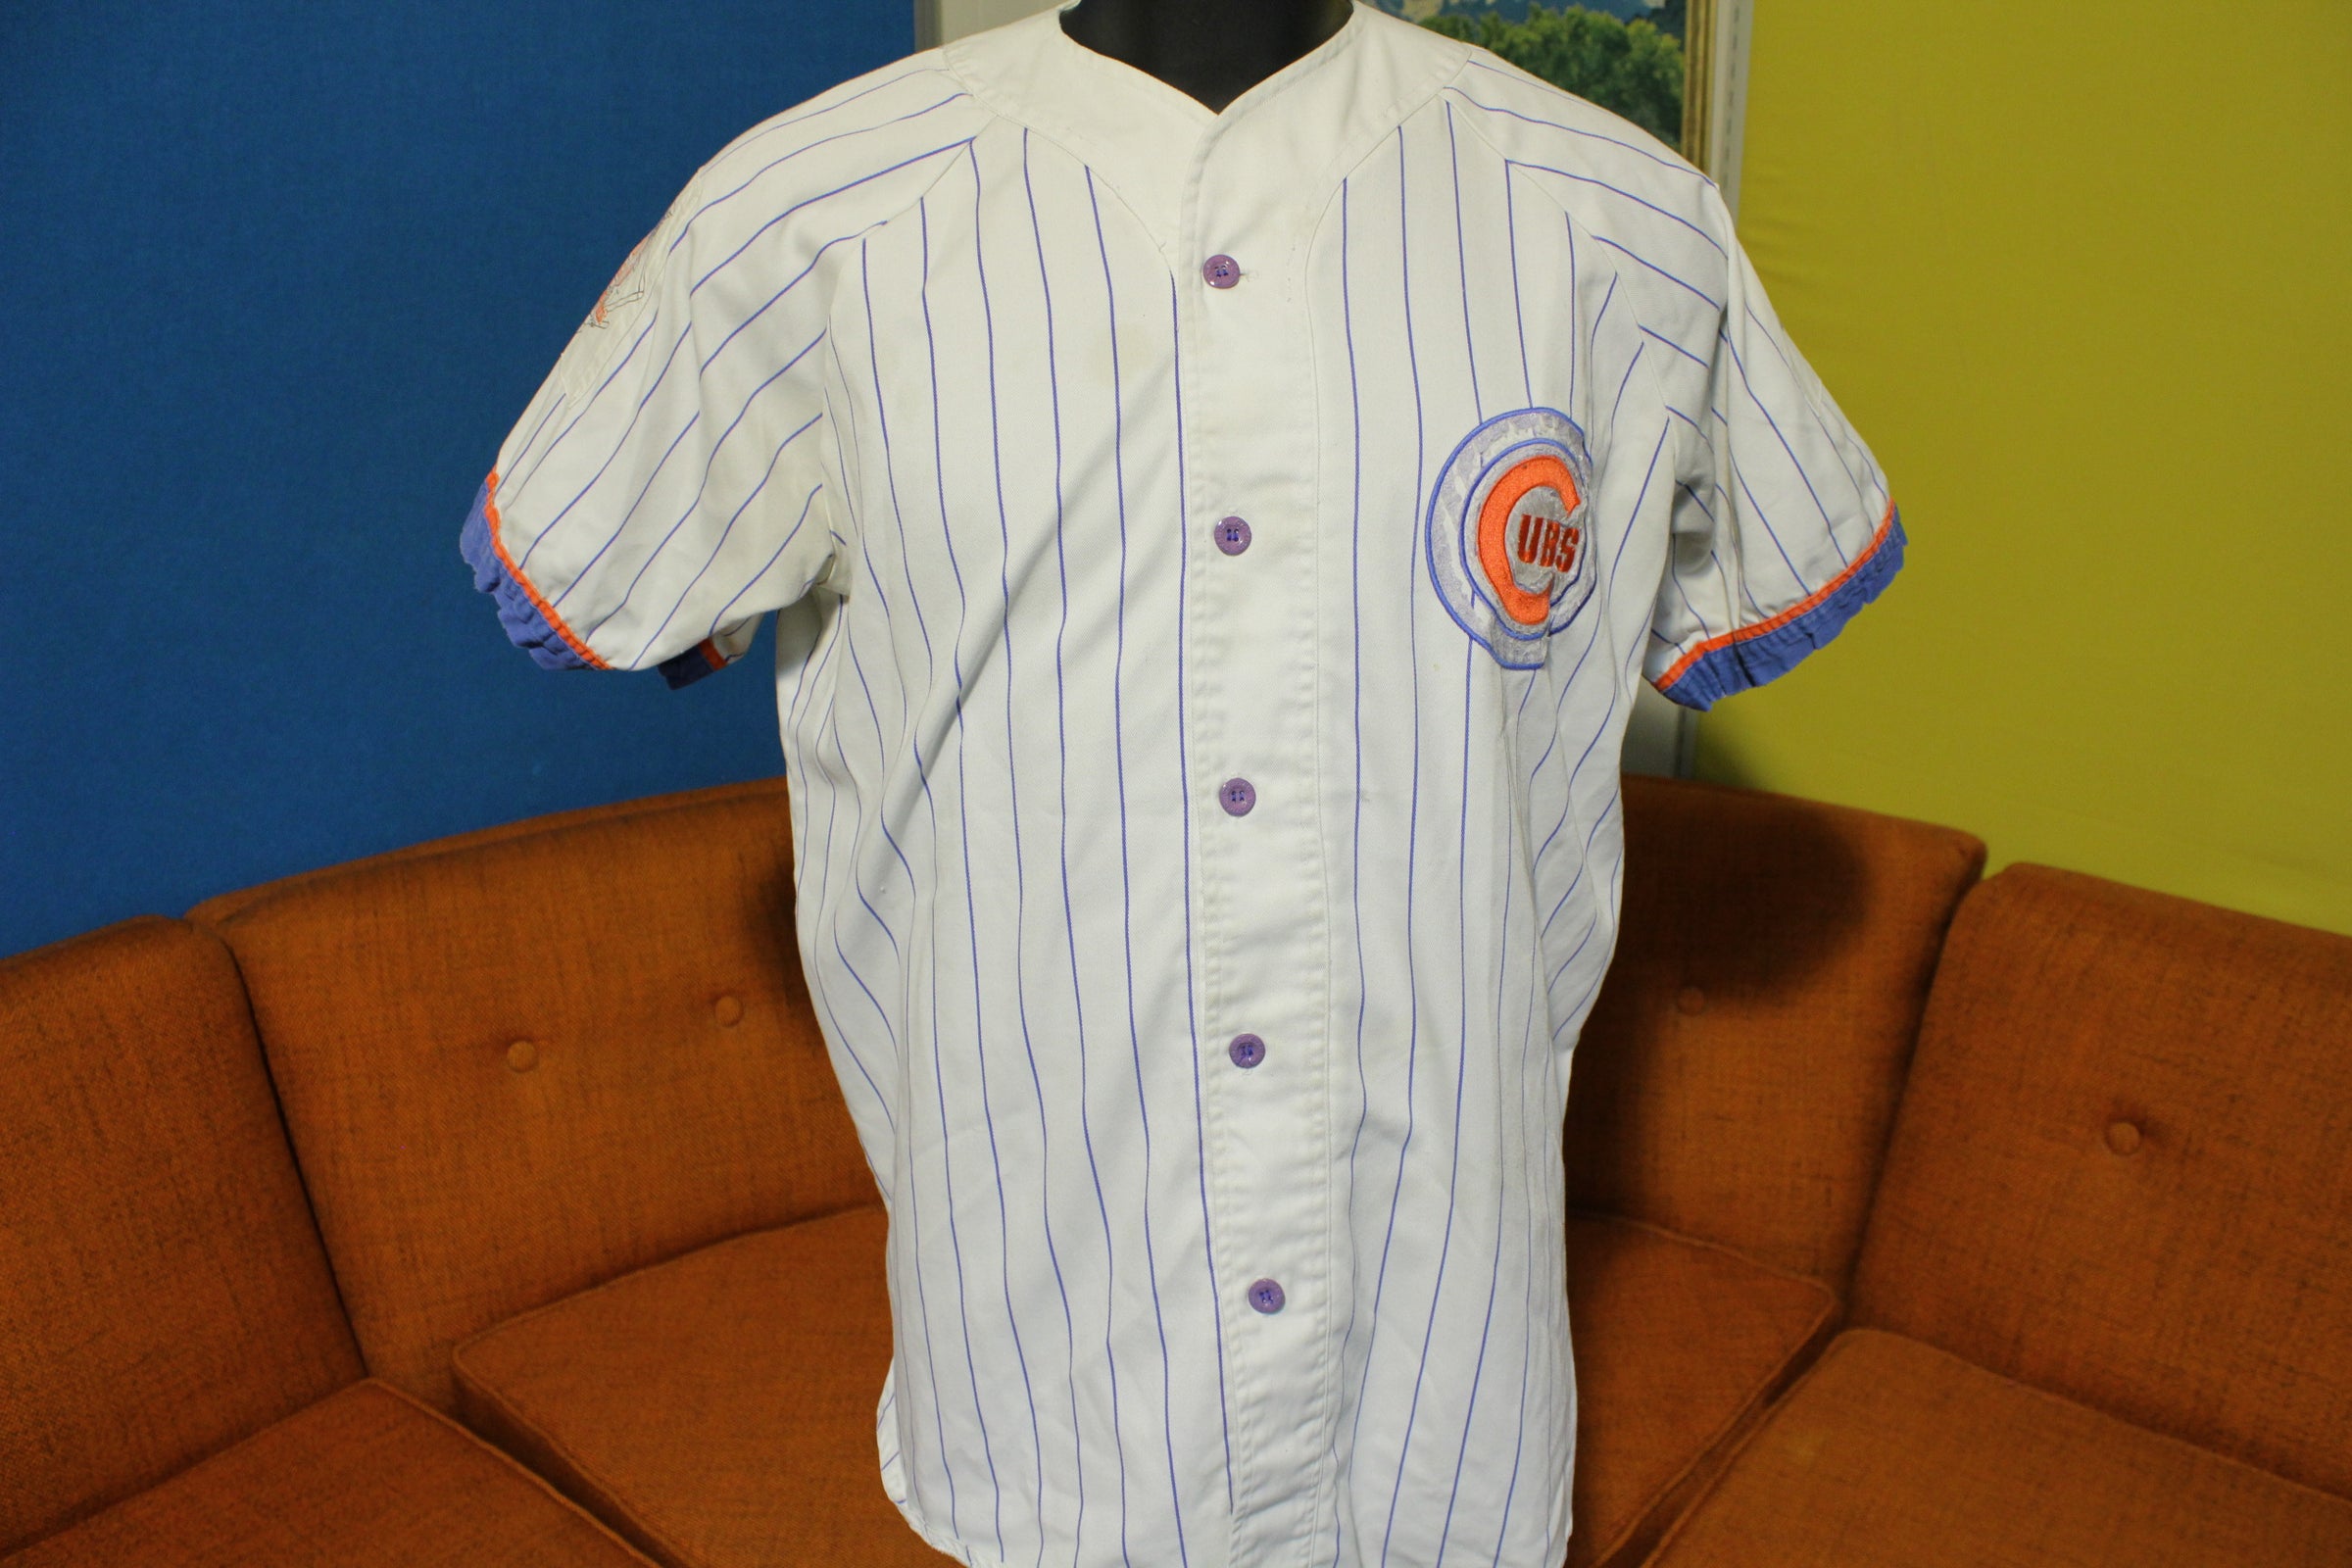 MLB Chicago Cubs Men's Button-Down Jersey - S